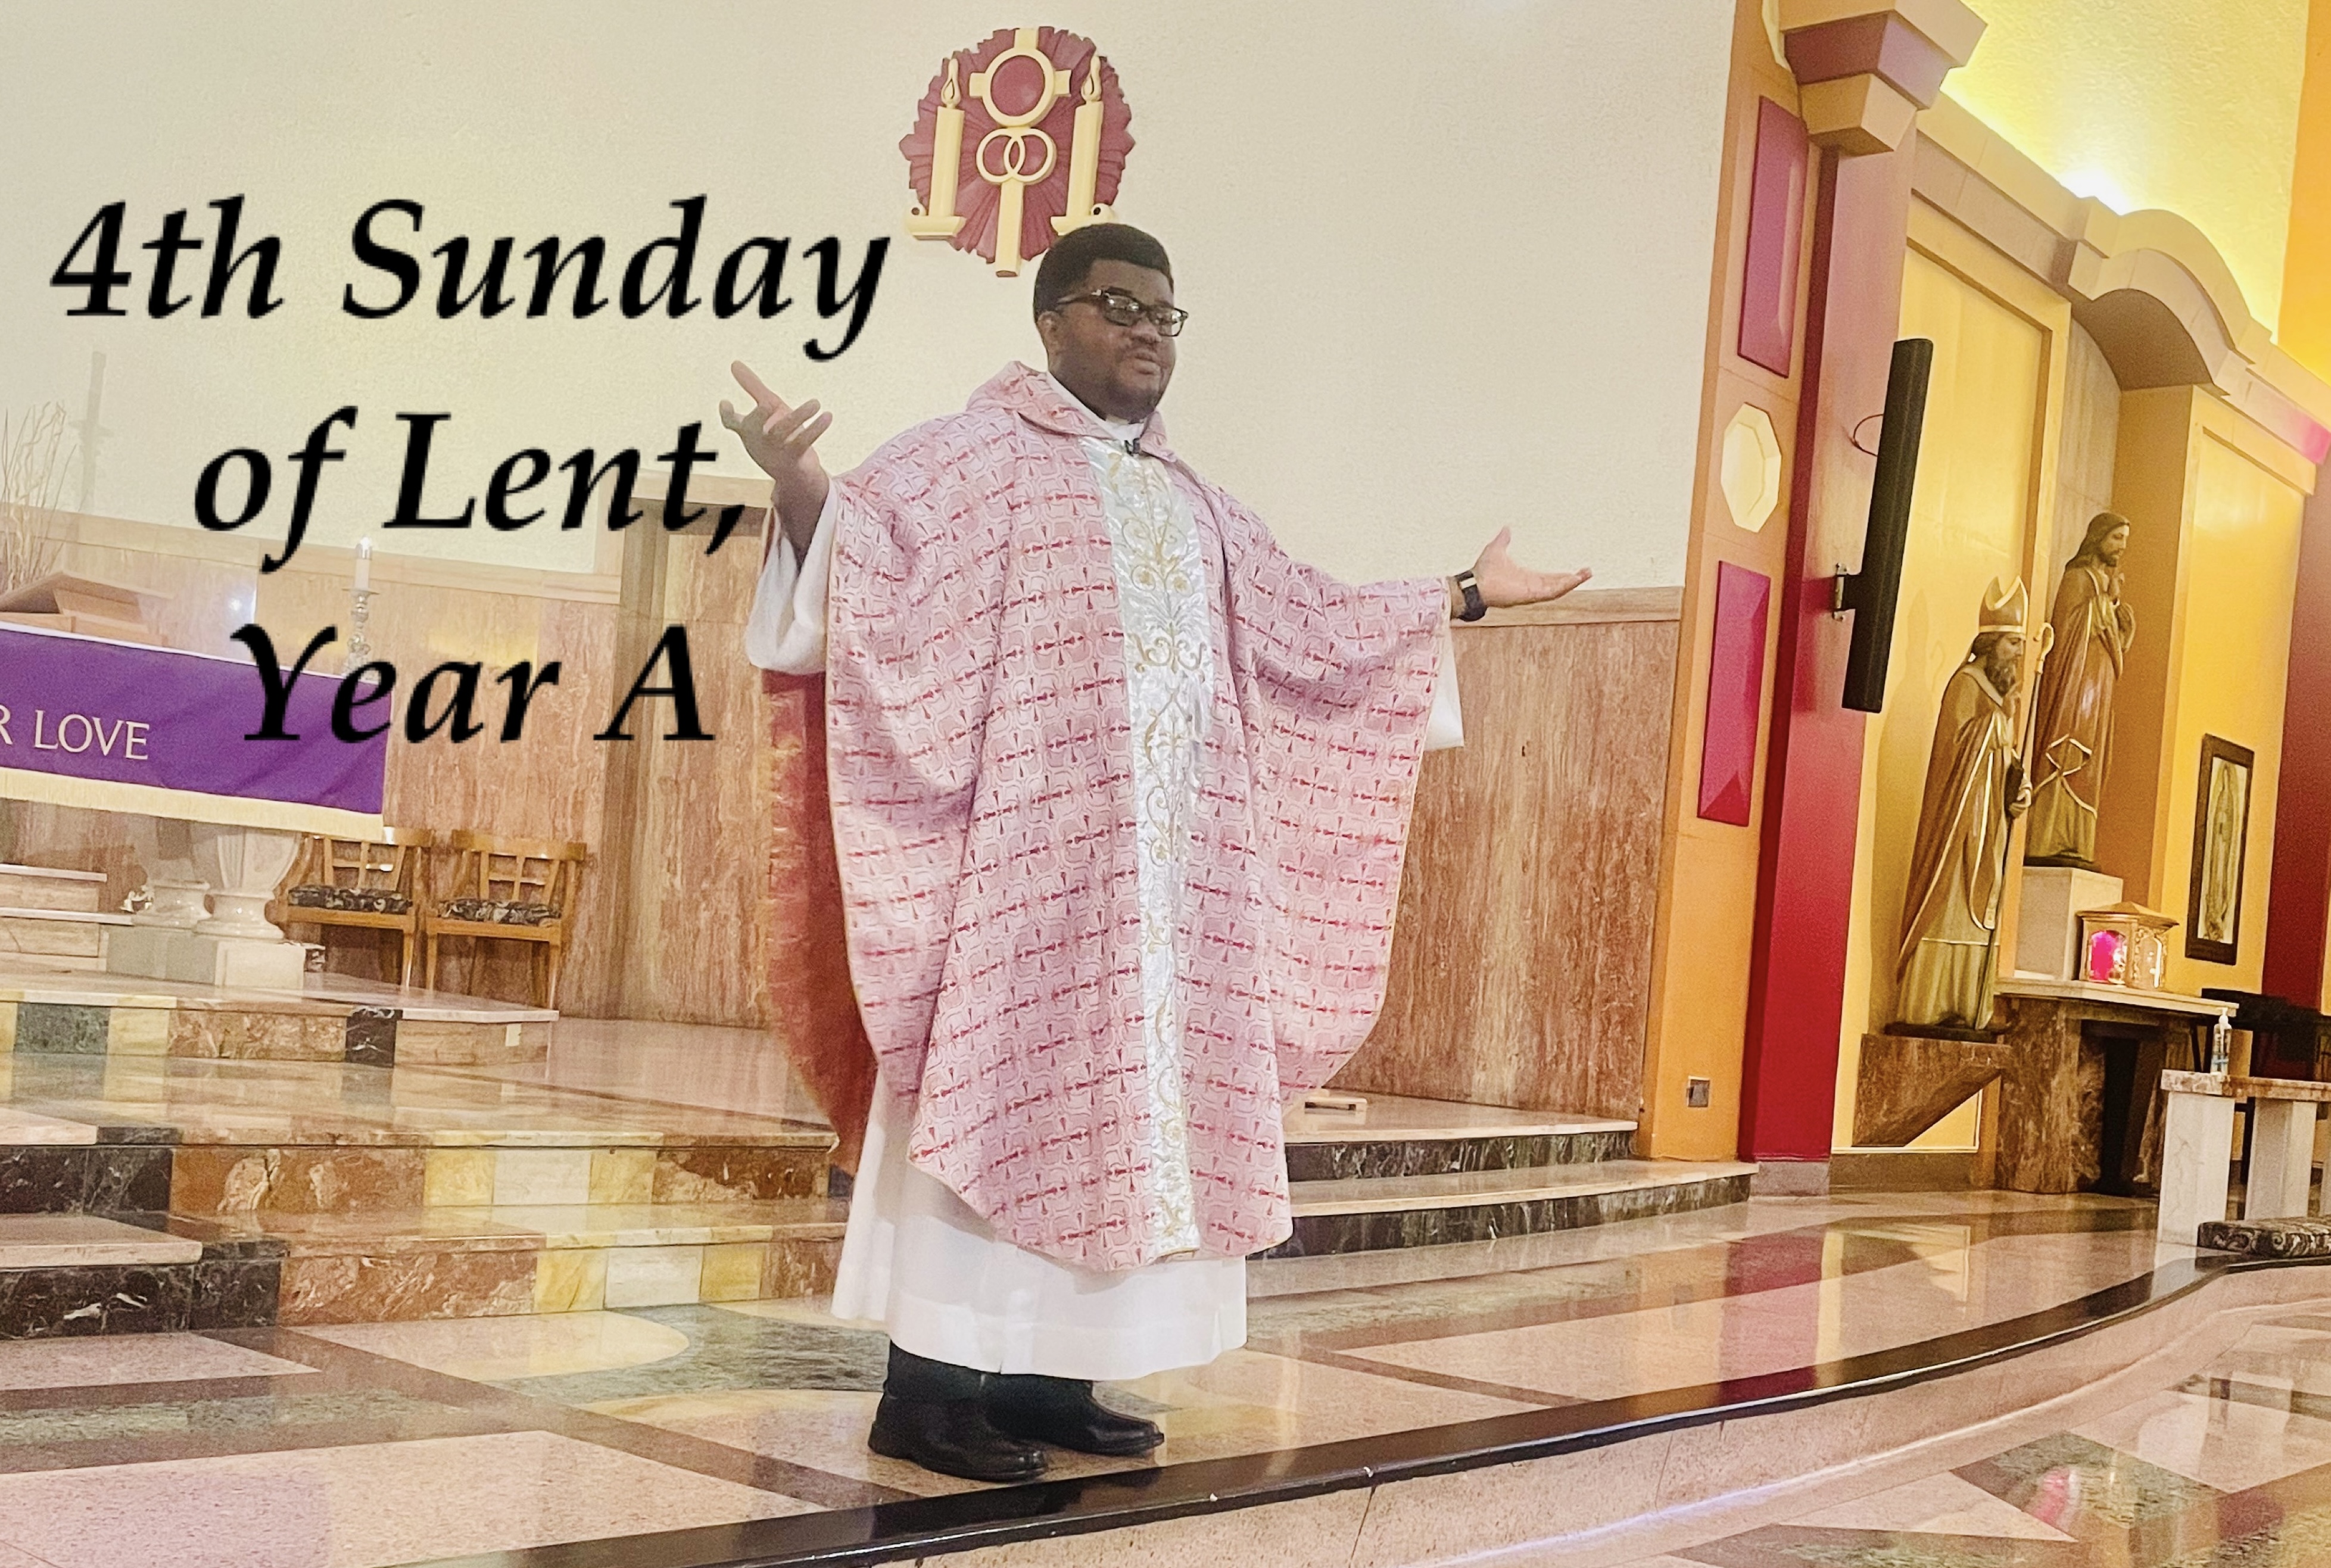 4th Sunday of Lent, Year A